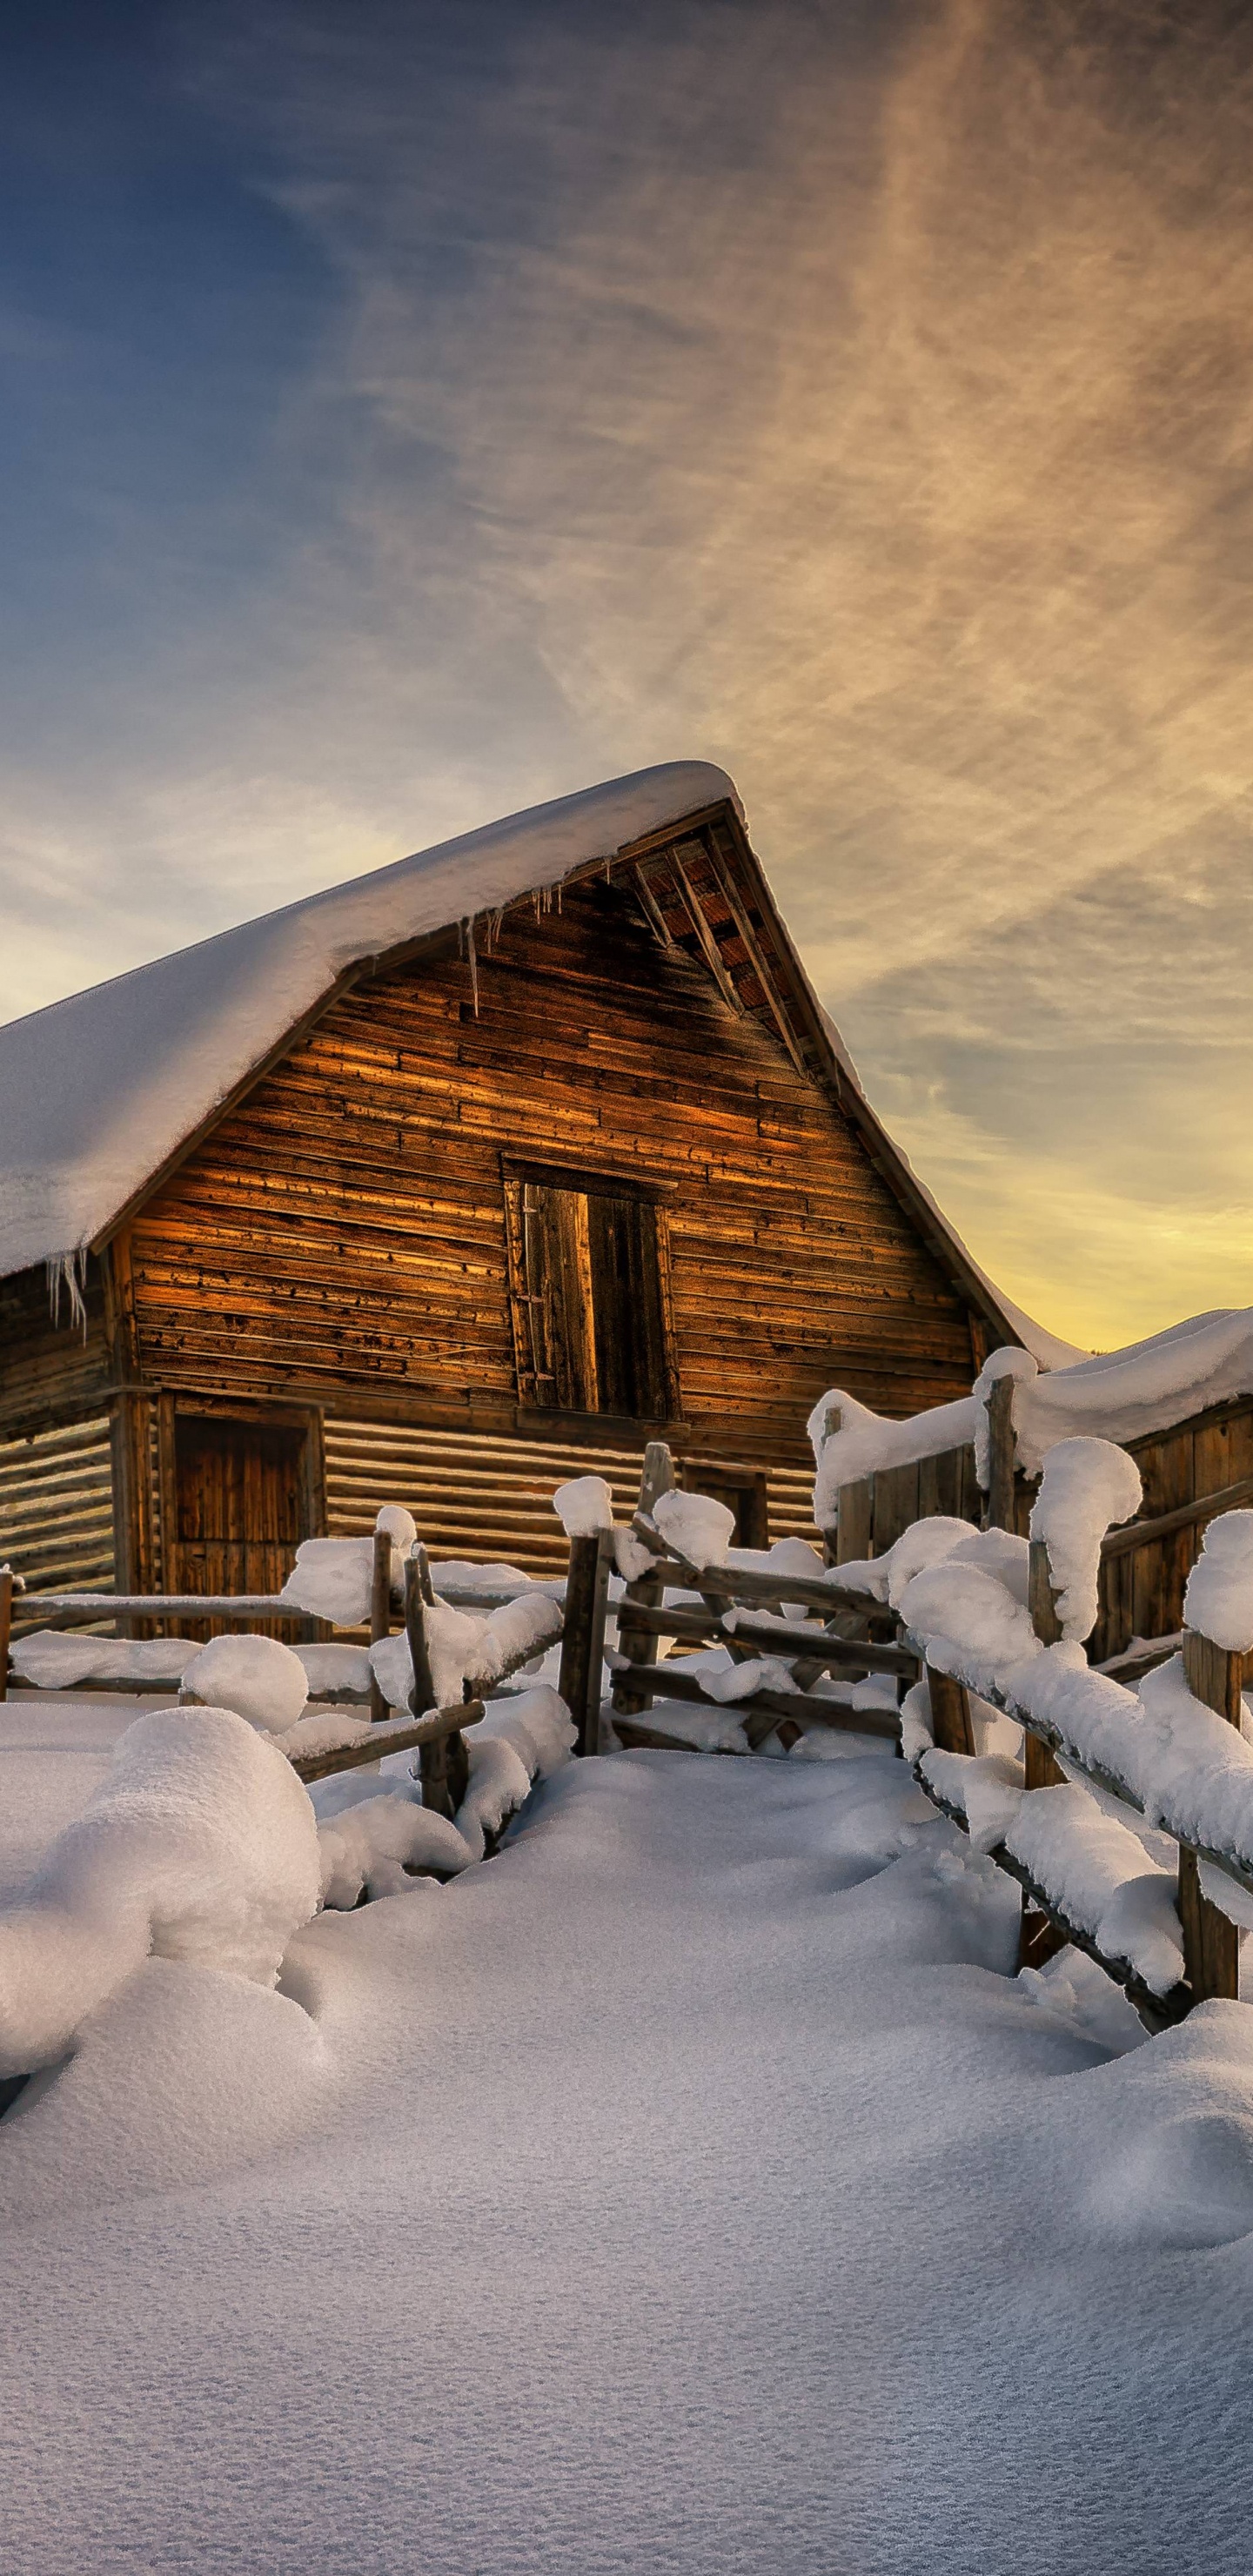 Brown Wooden House Covered by Snow Under Cloudy Sky. Wallpaper in 1440x2960 Resolution